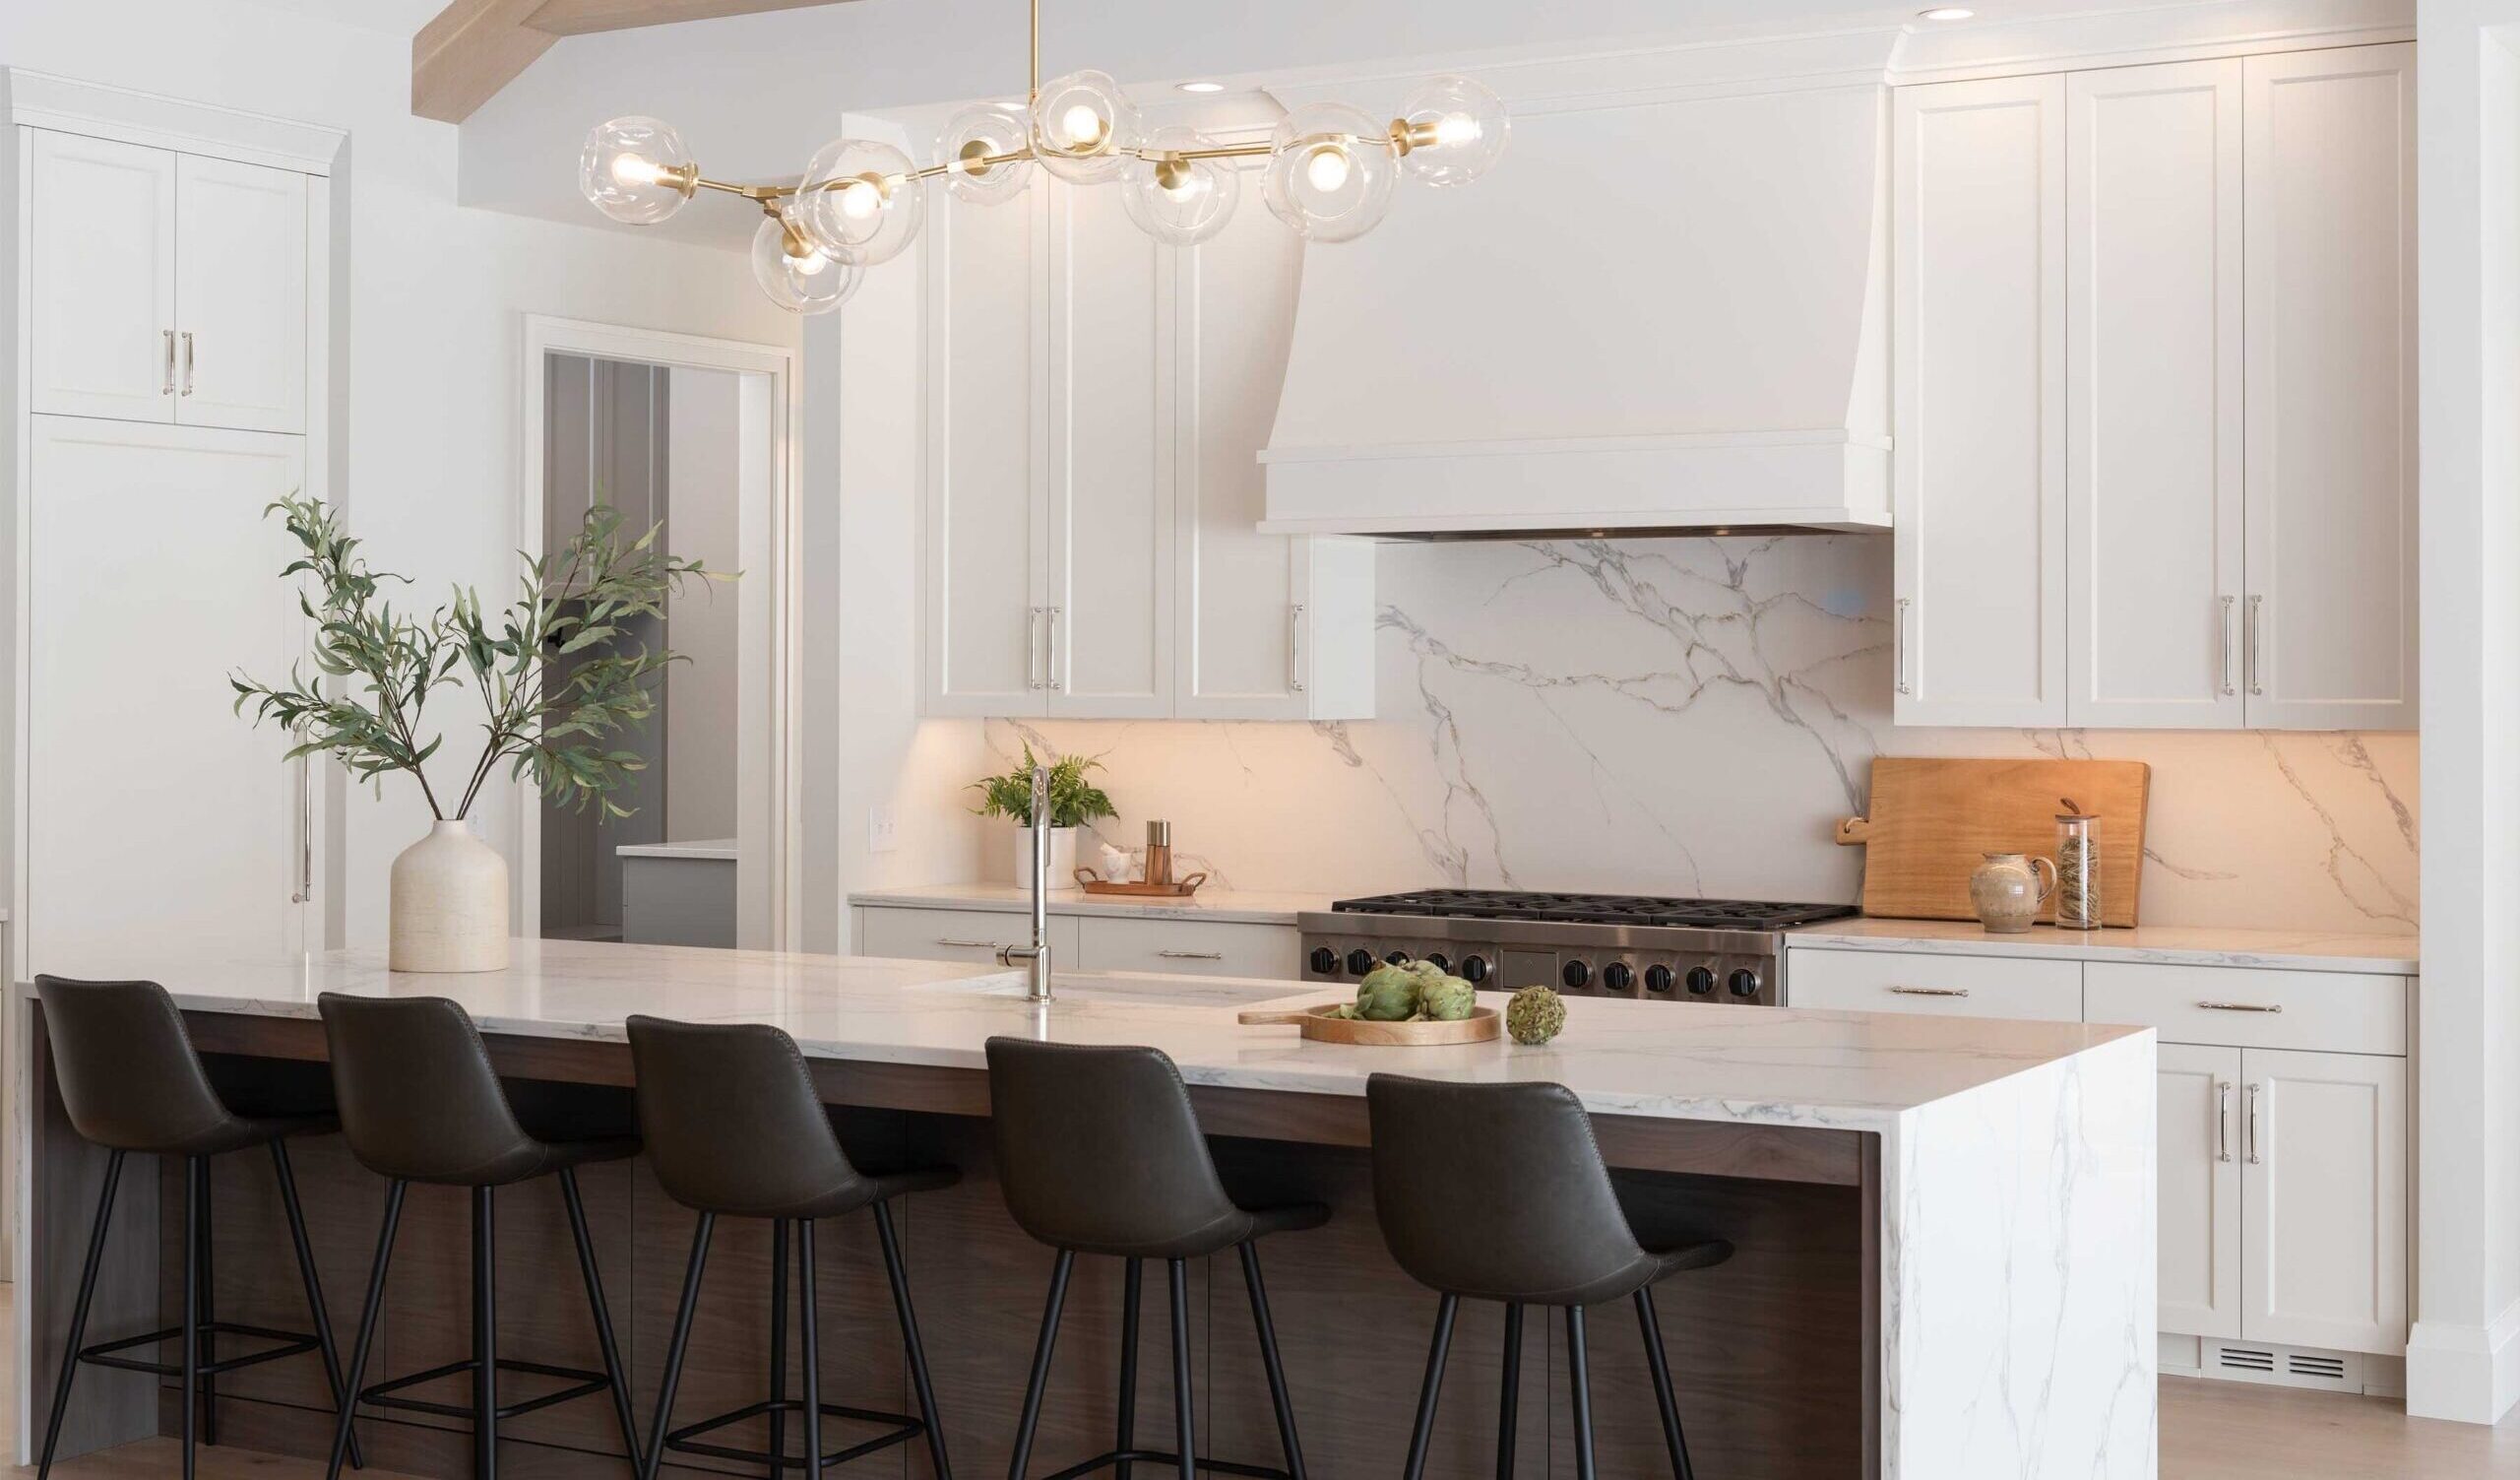 A modern kitchen with white cabinets and black stools.